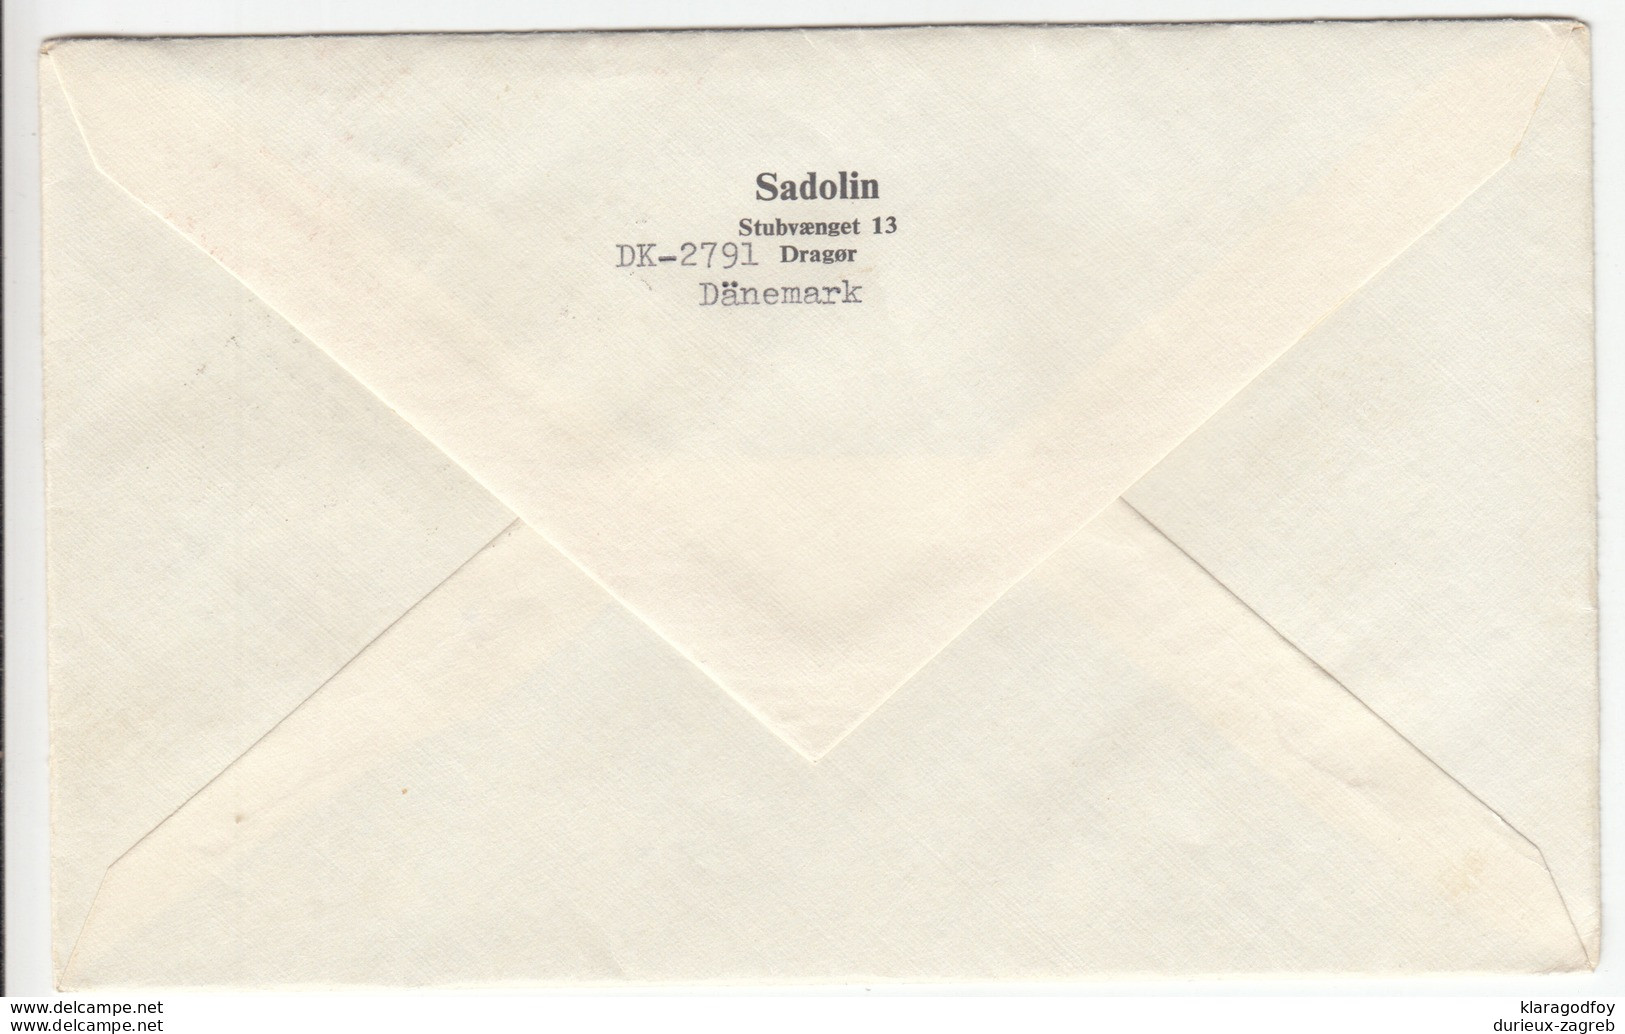 Sadolin Company Letter Cover Travelled 1971 To Austria 171005 - Covers & Documents